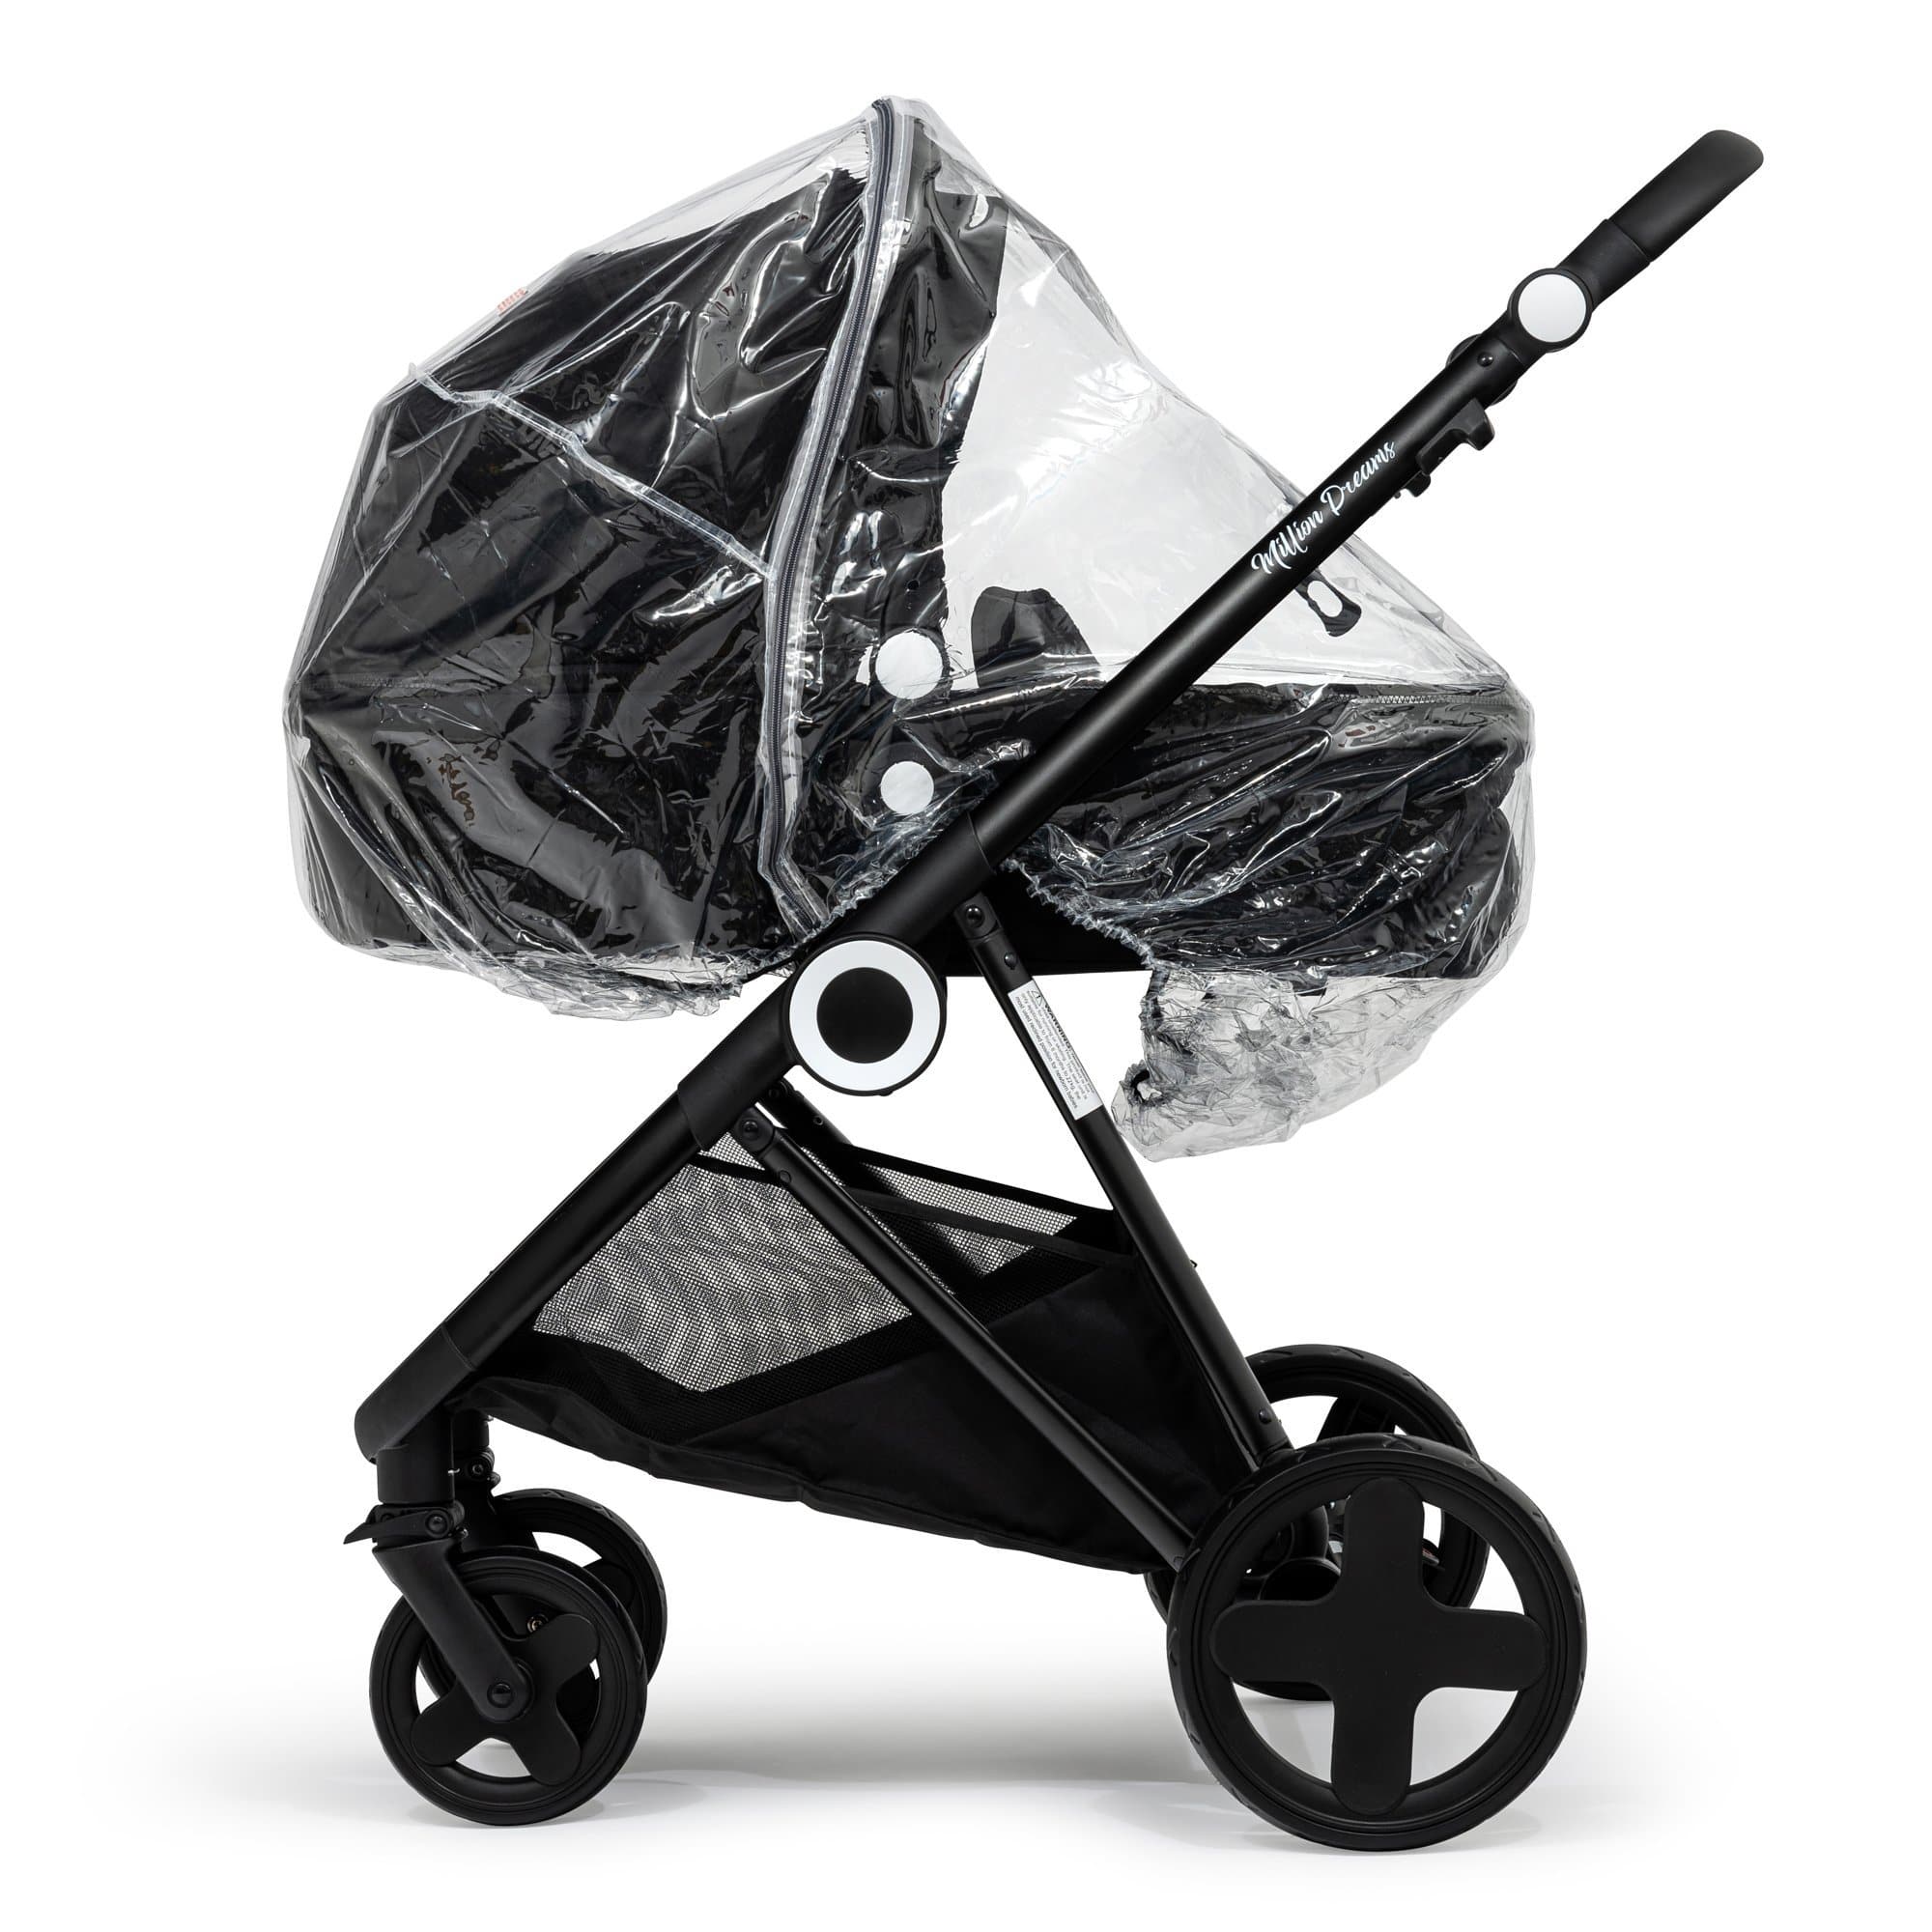 2 in 1 Rain Cover Compatible with Mutsy - Fits All Models - For Your Little One